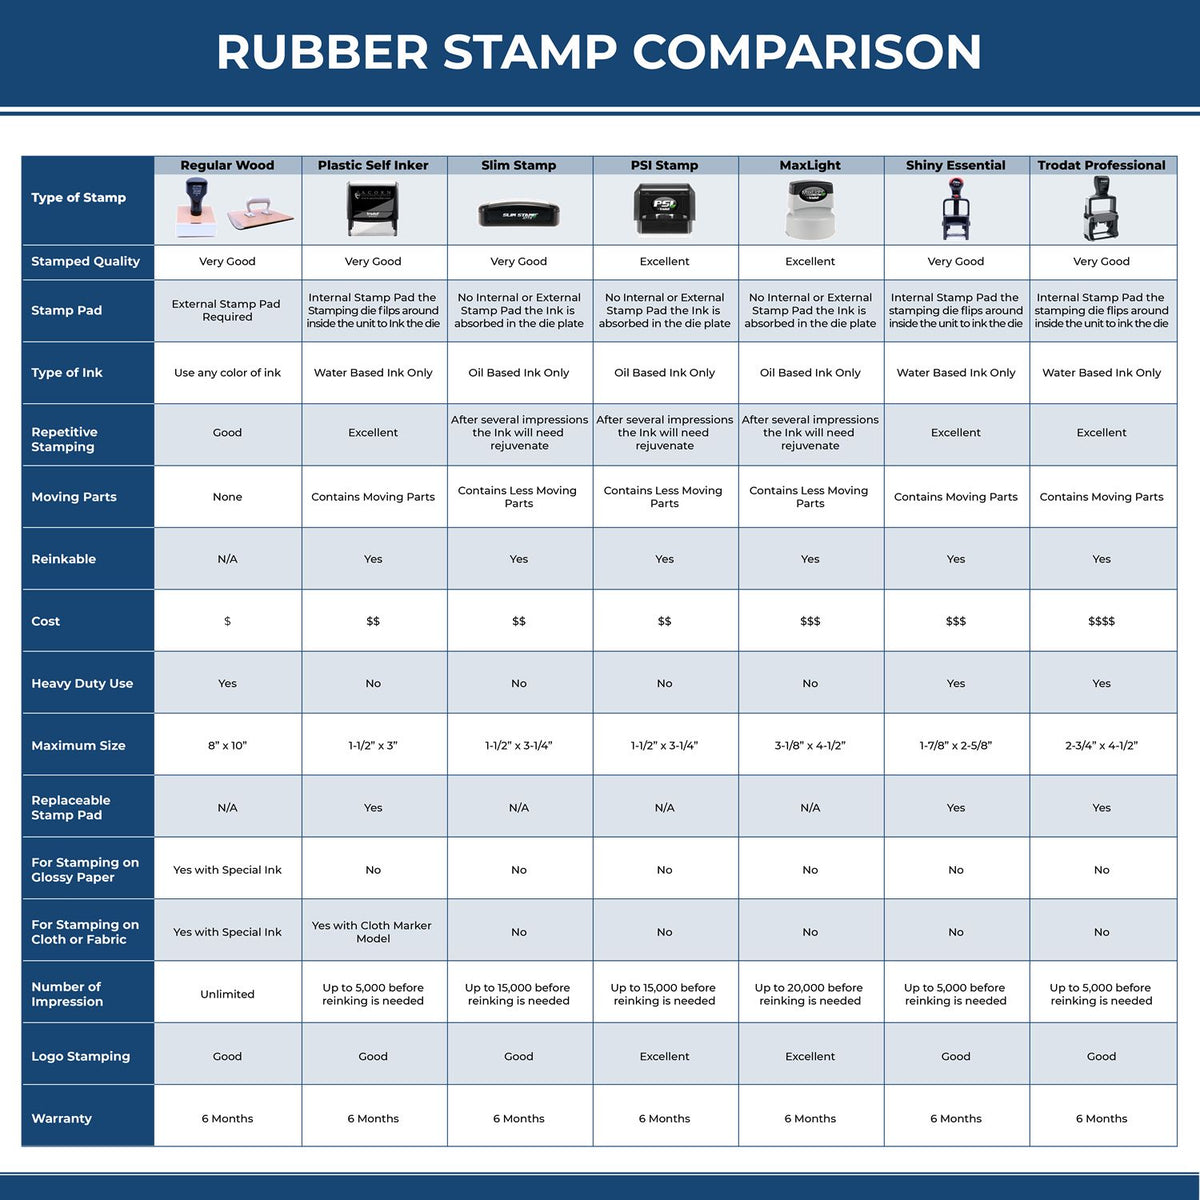 A comparison chart for the different types of mount models available for the Wooden Handle Maine State Seal Notary Public Stamp.